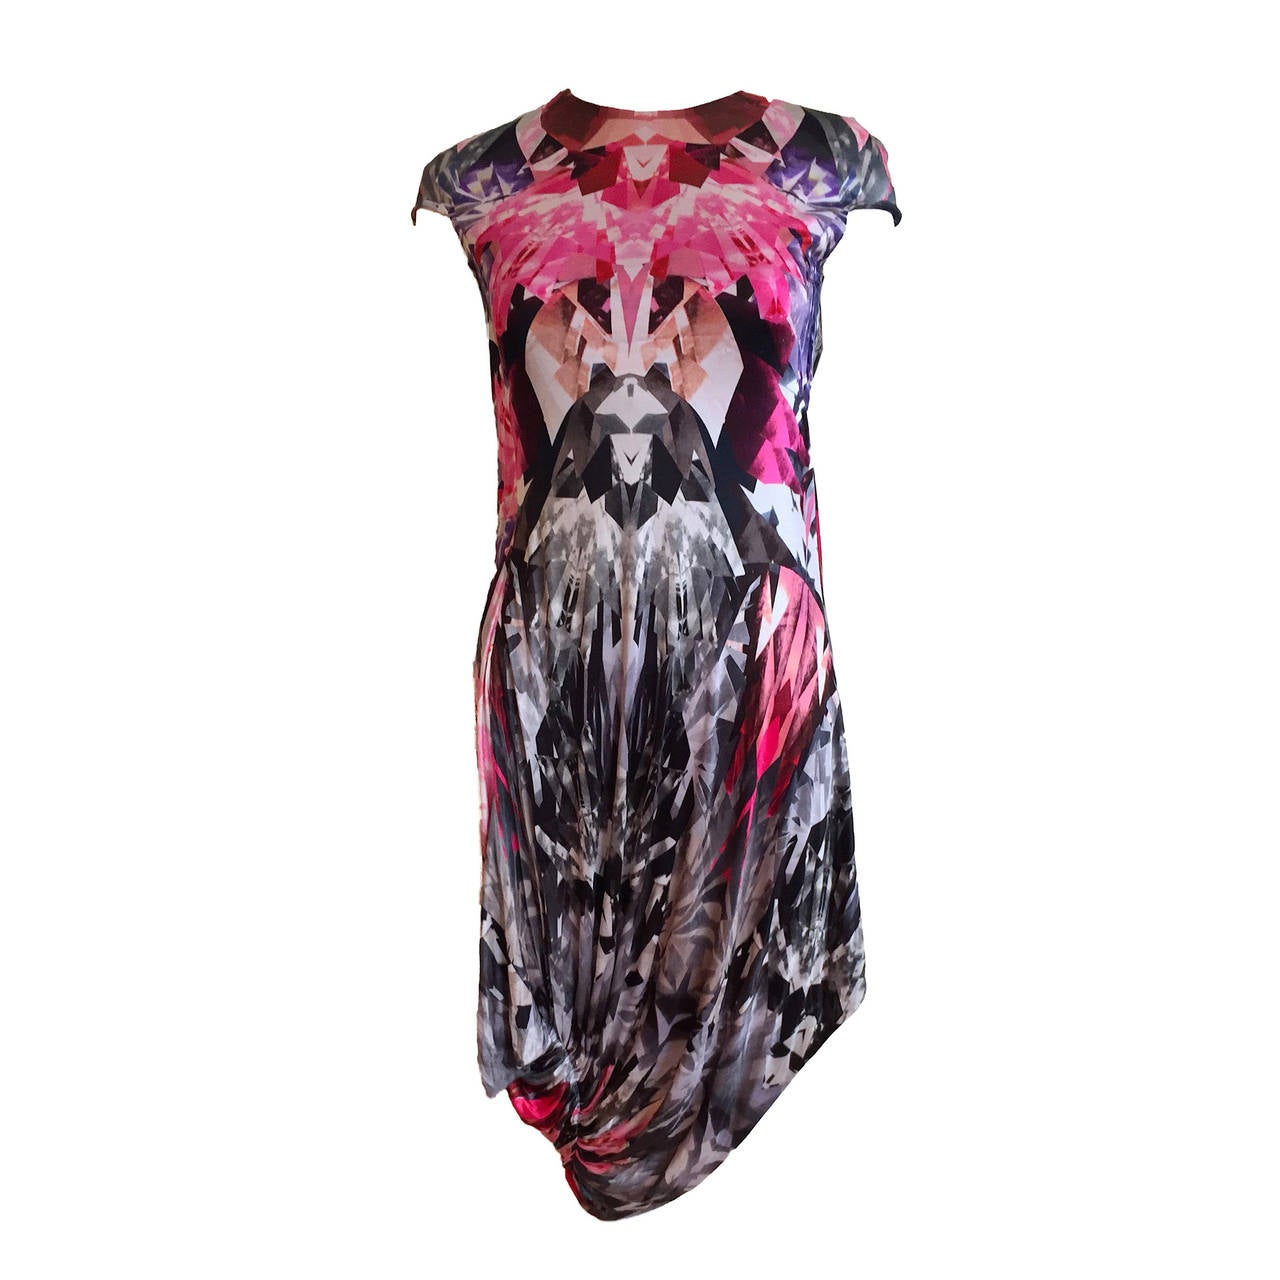 Rare Alexander McQueen Iconic Pink Crystal Kaleidoscope Dress, SS 2009, IT 38 For Sale